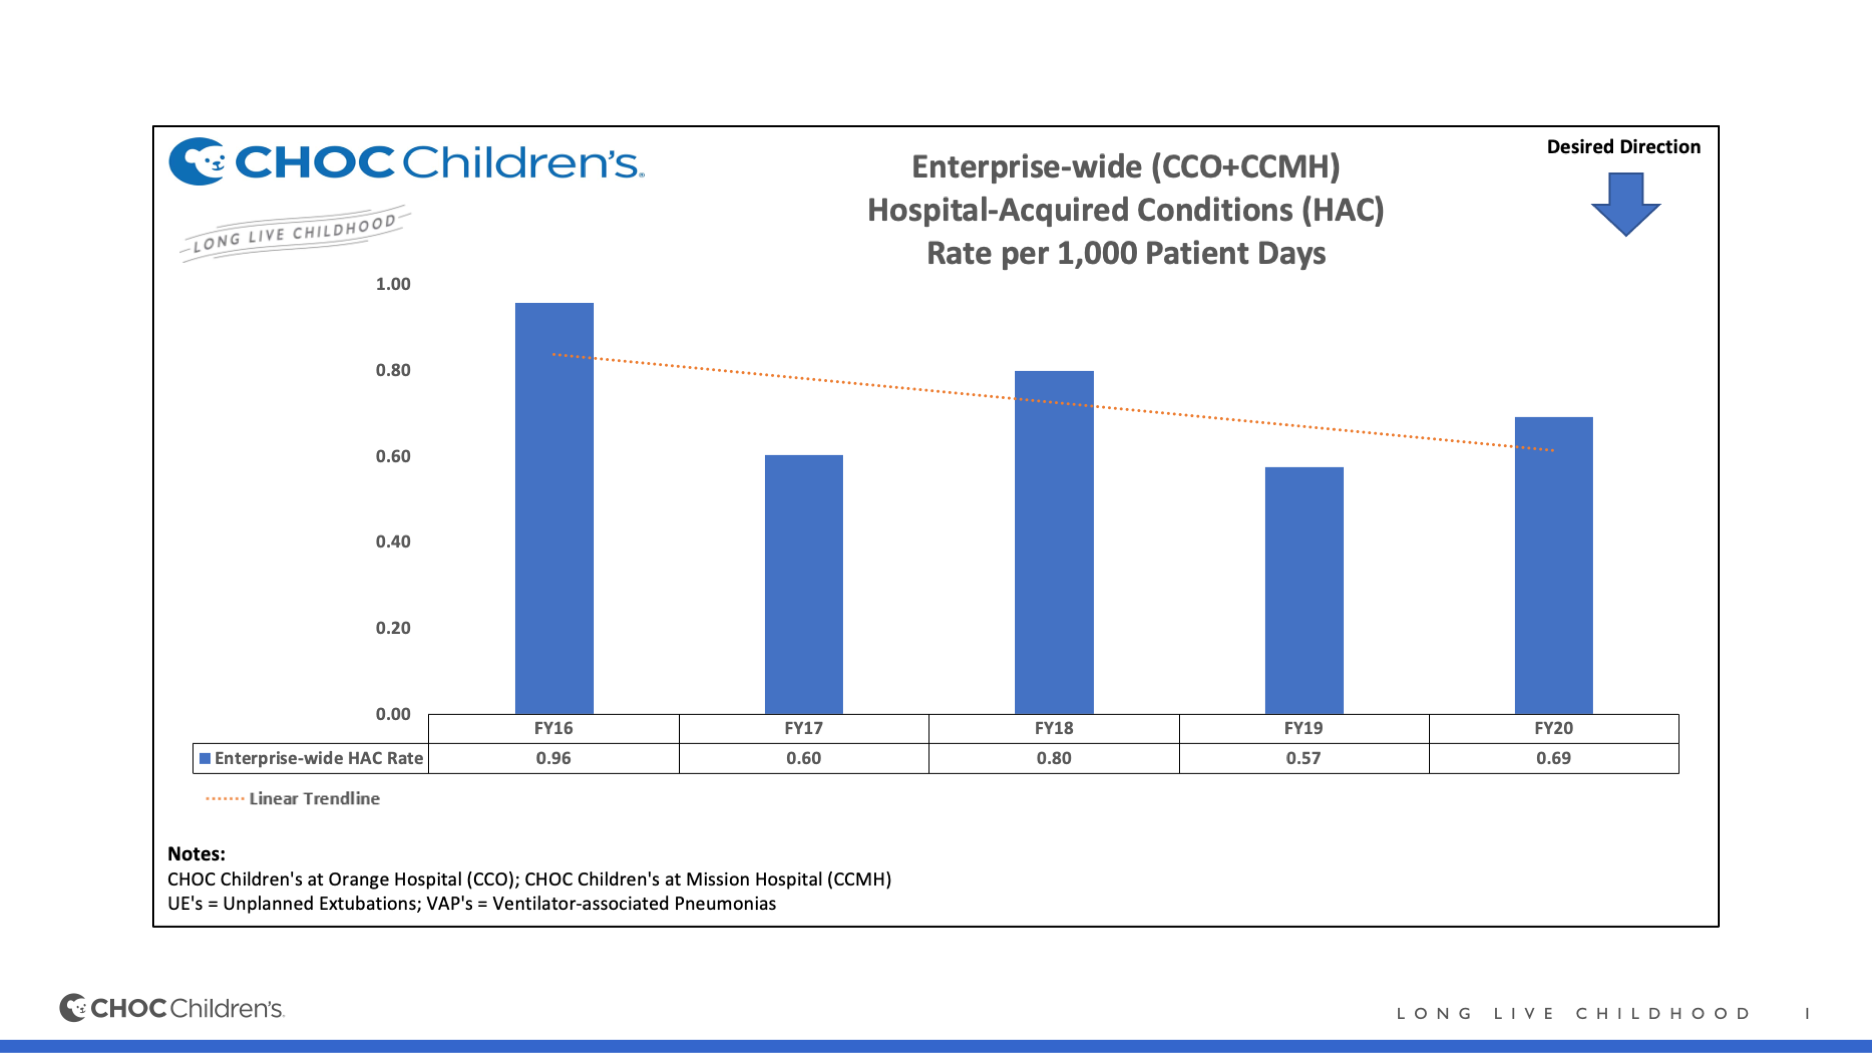 Hospital-Acquired Conditions at CHOC Children’s